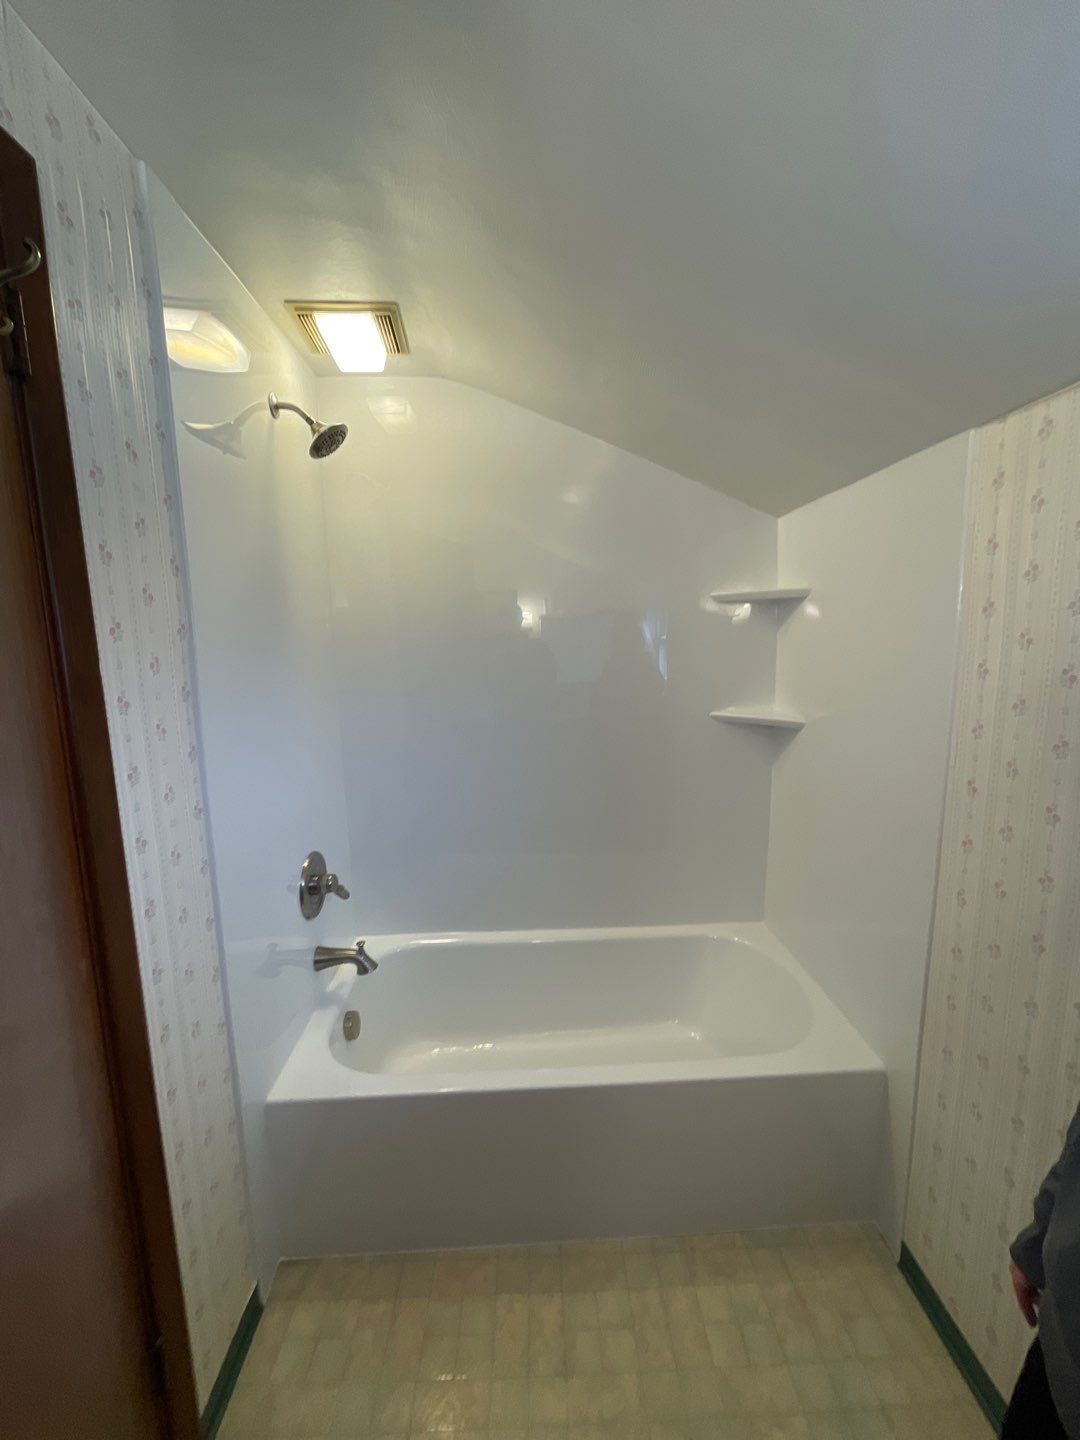 New Tub/Shower Combo in Irwin by Mt. Pleasant Window & Remodeling